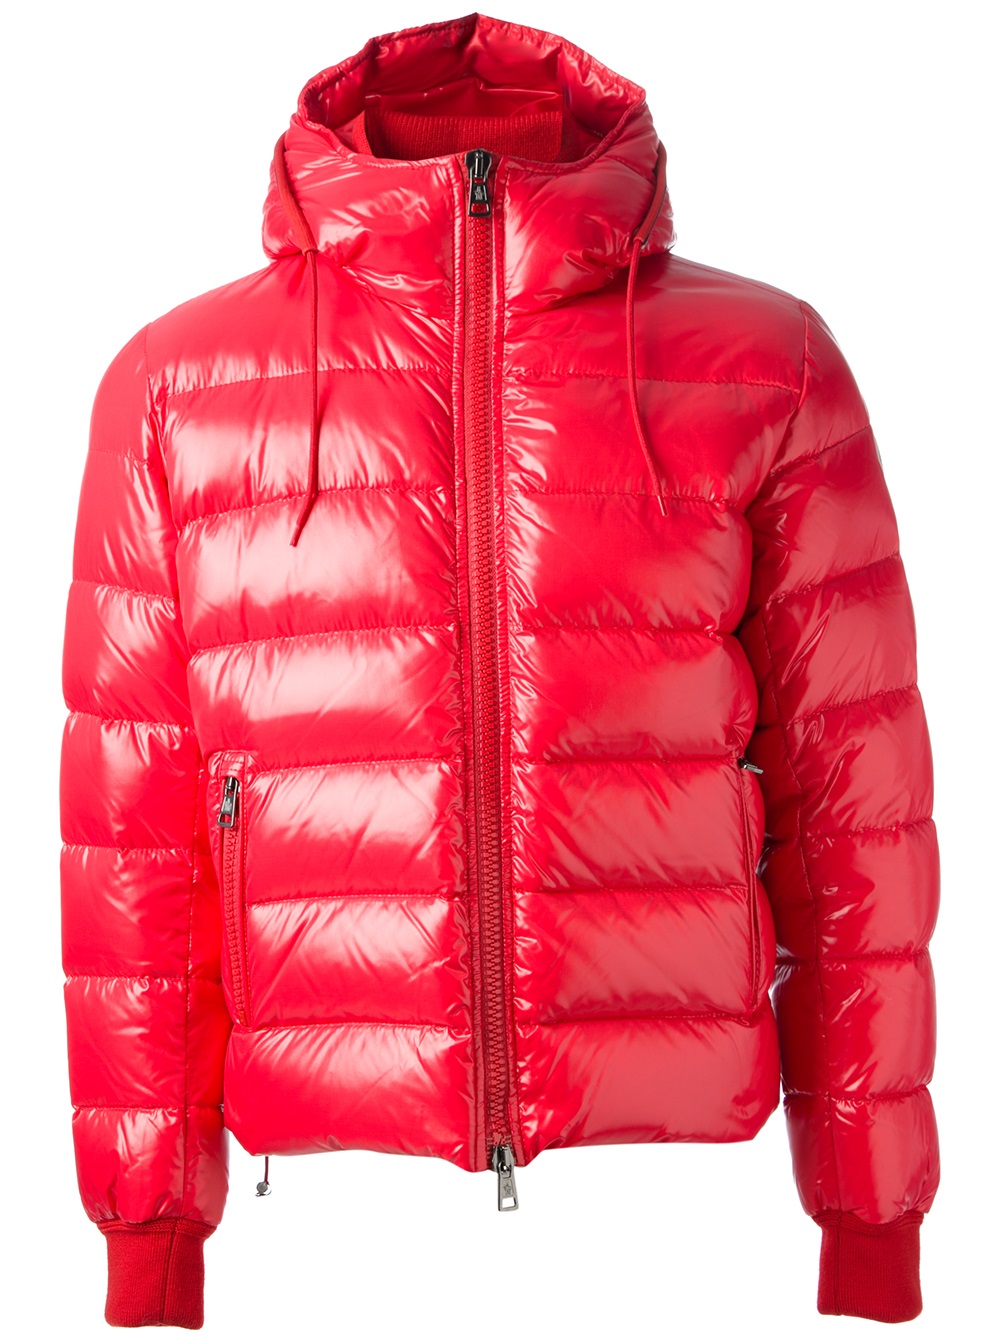 Lyst - Moncler 'maya' Padded Jacket in Red for Men